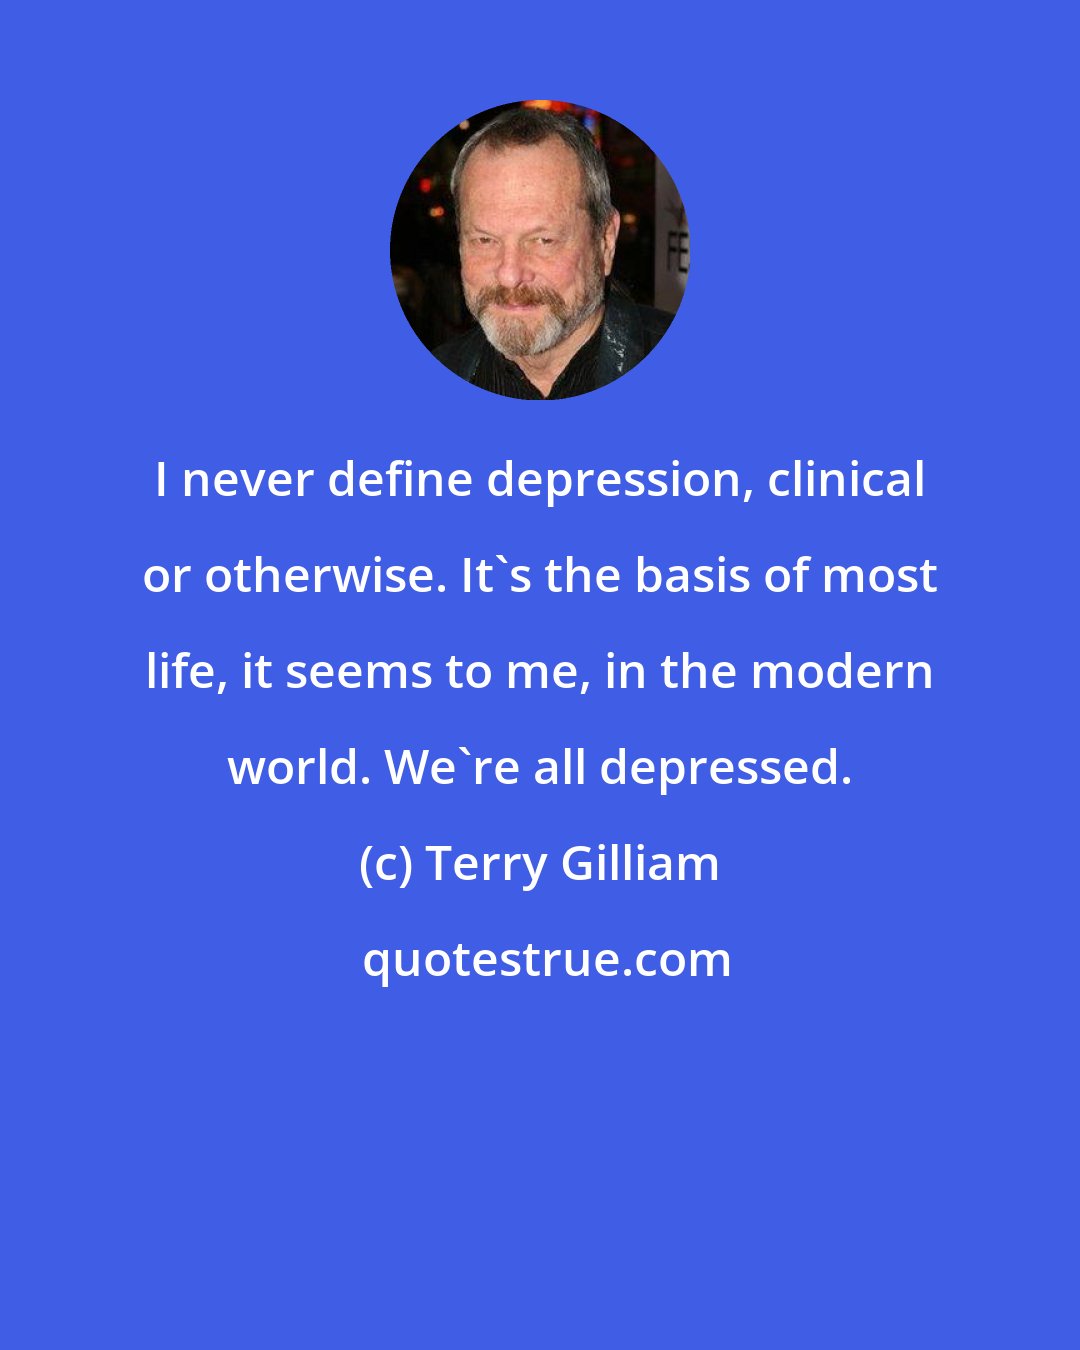 Terry Gilliam: I never define depression, clinical or otherwise. It's the basis of most life, it seems to me, in the modern world. We're all depressed.